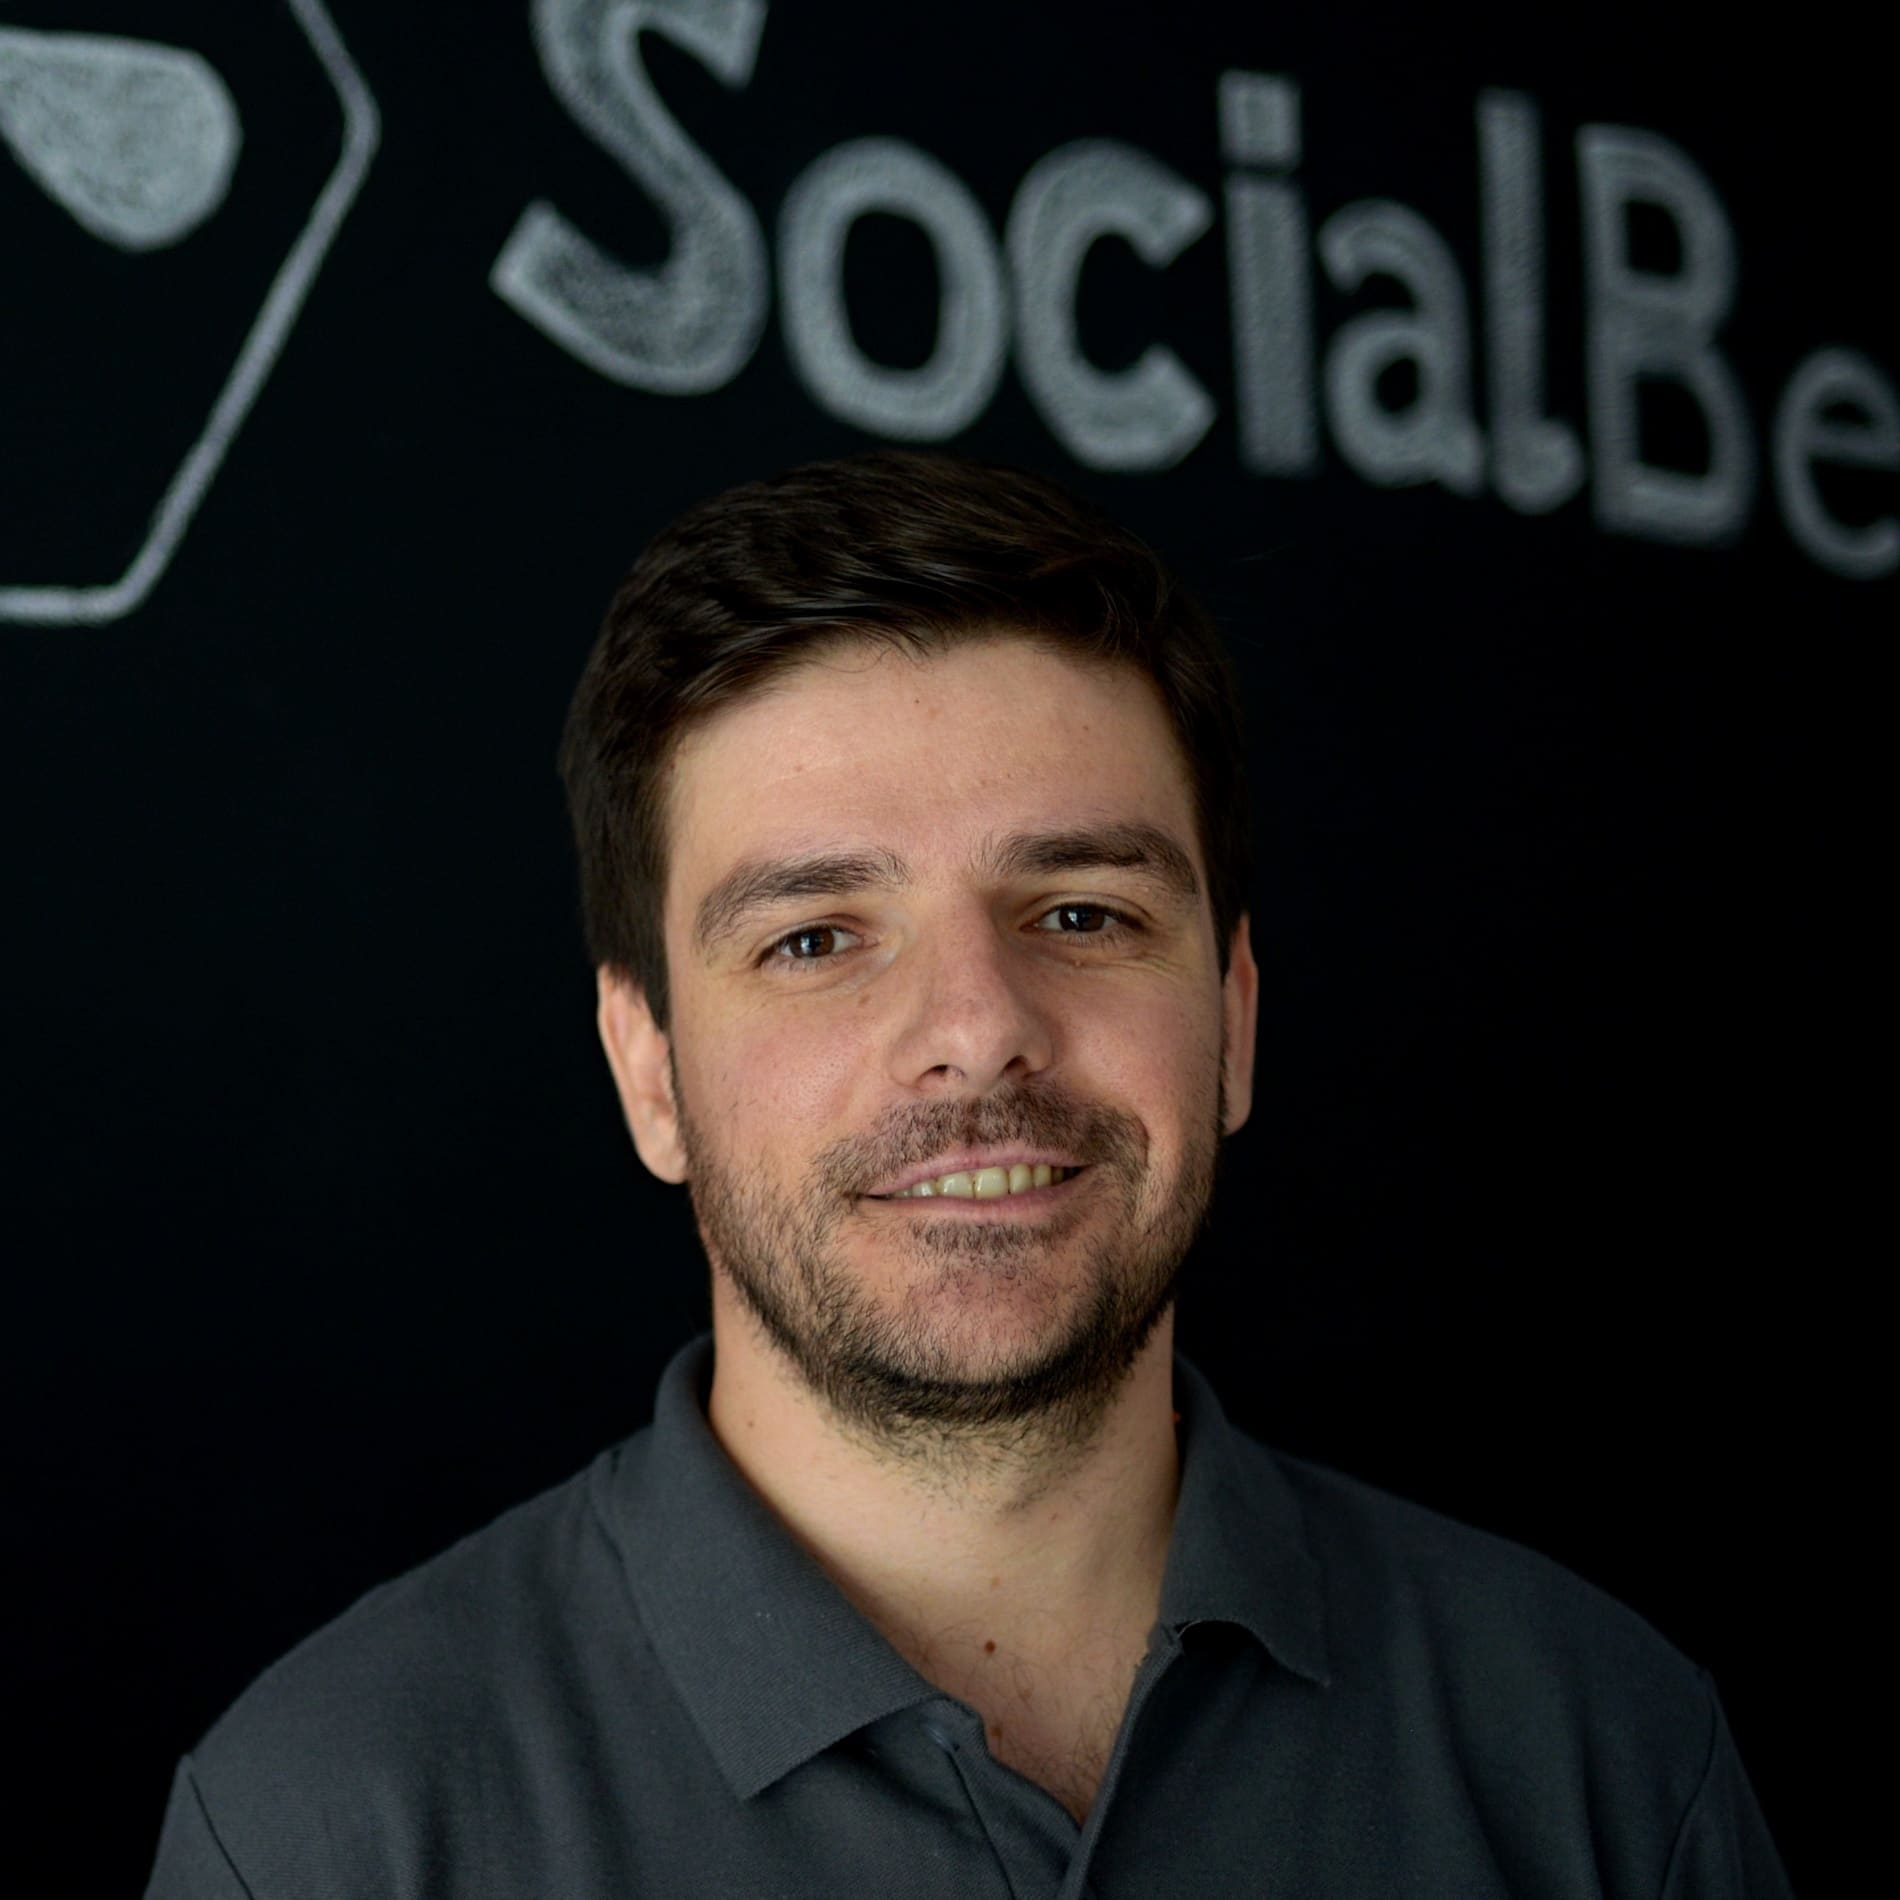 100% discount on SocialBee PRO Plan for the first 3 months ($237 value) by Ovi Negrean